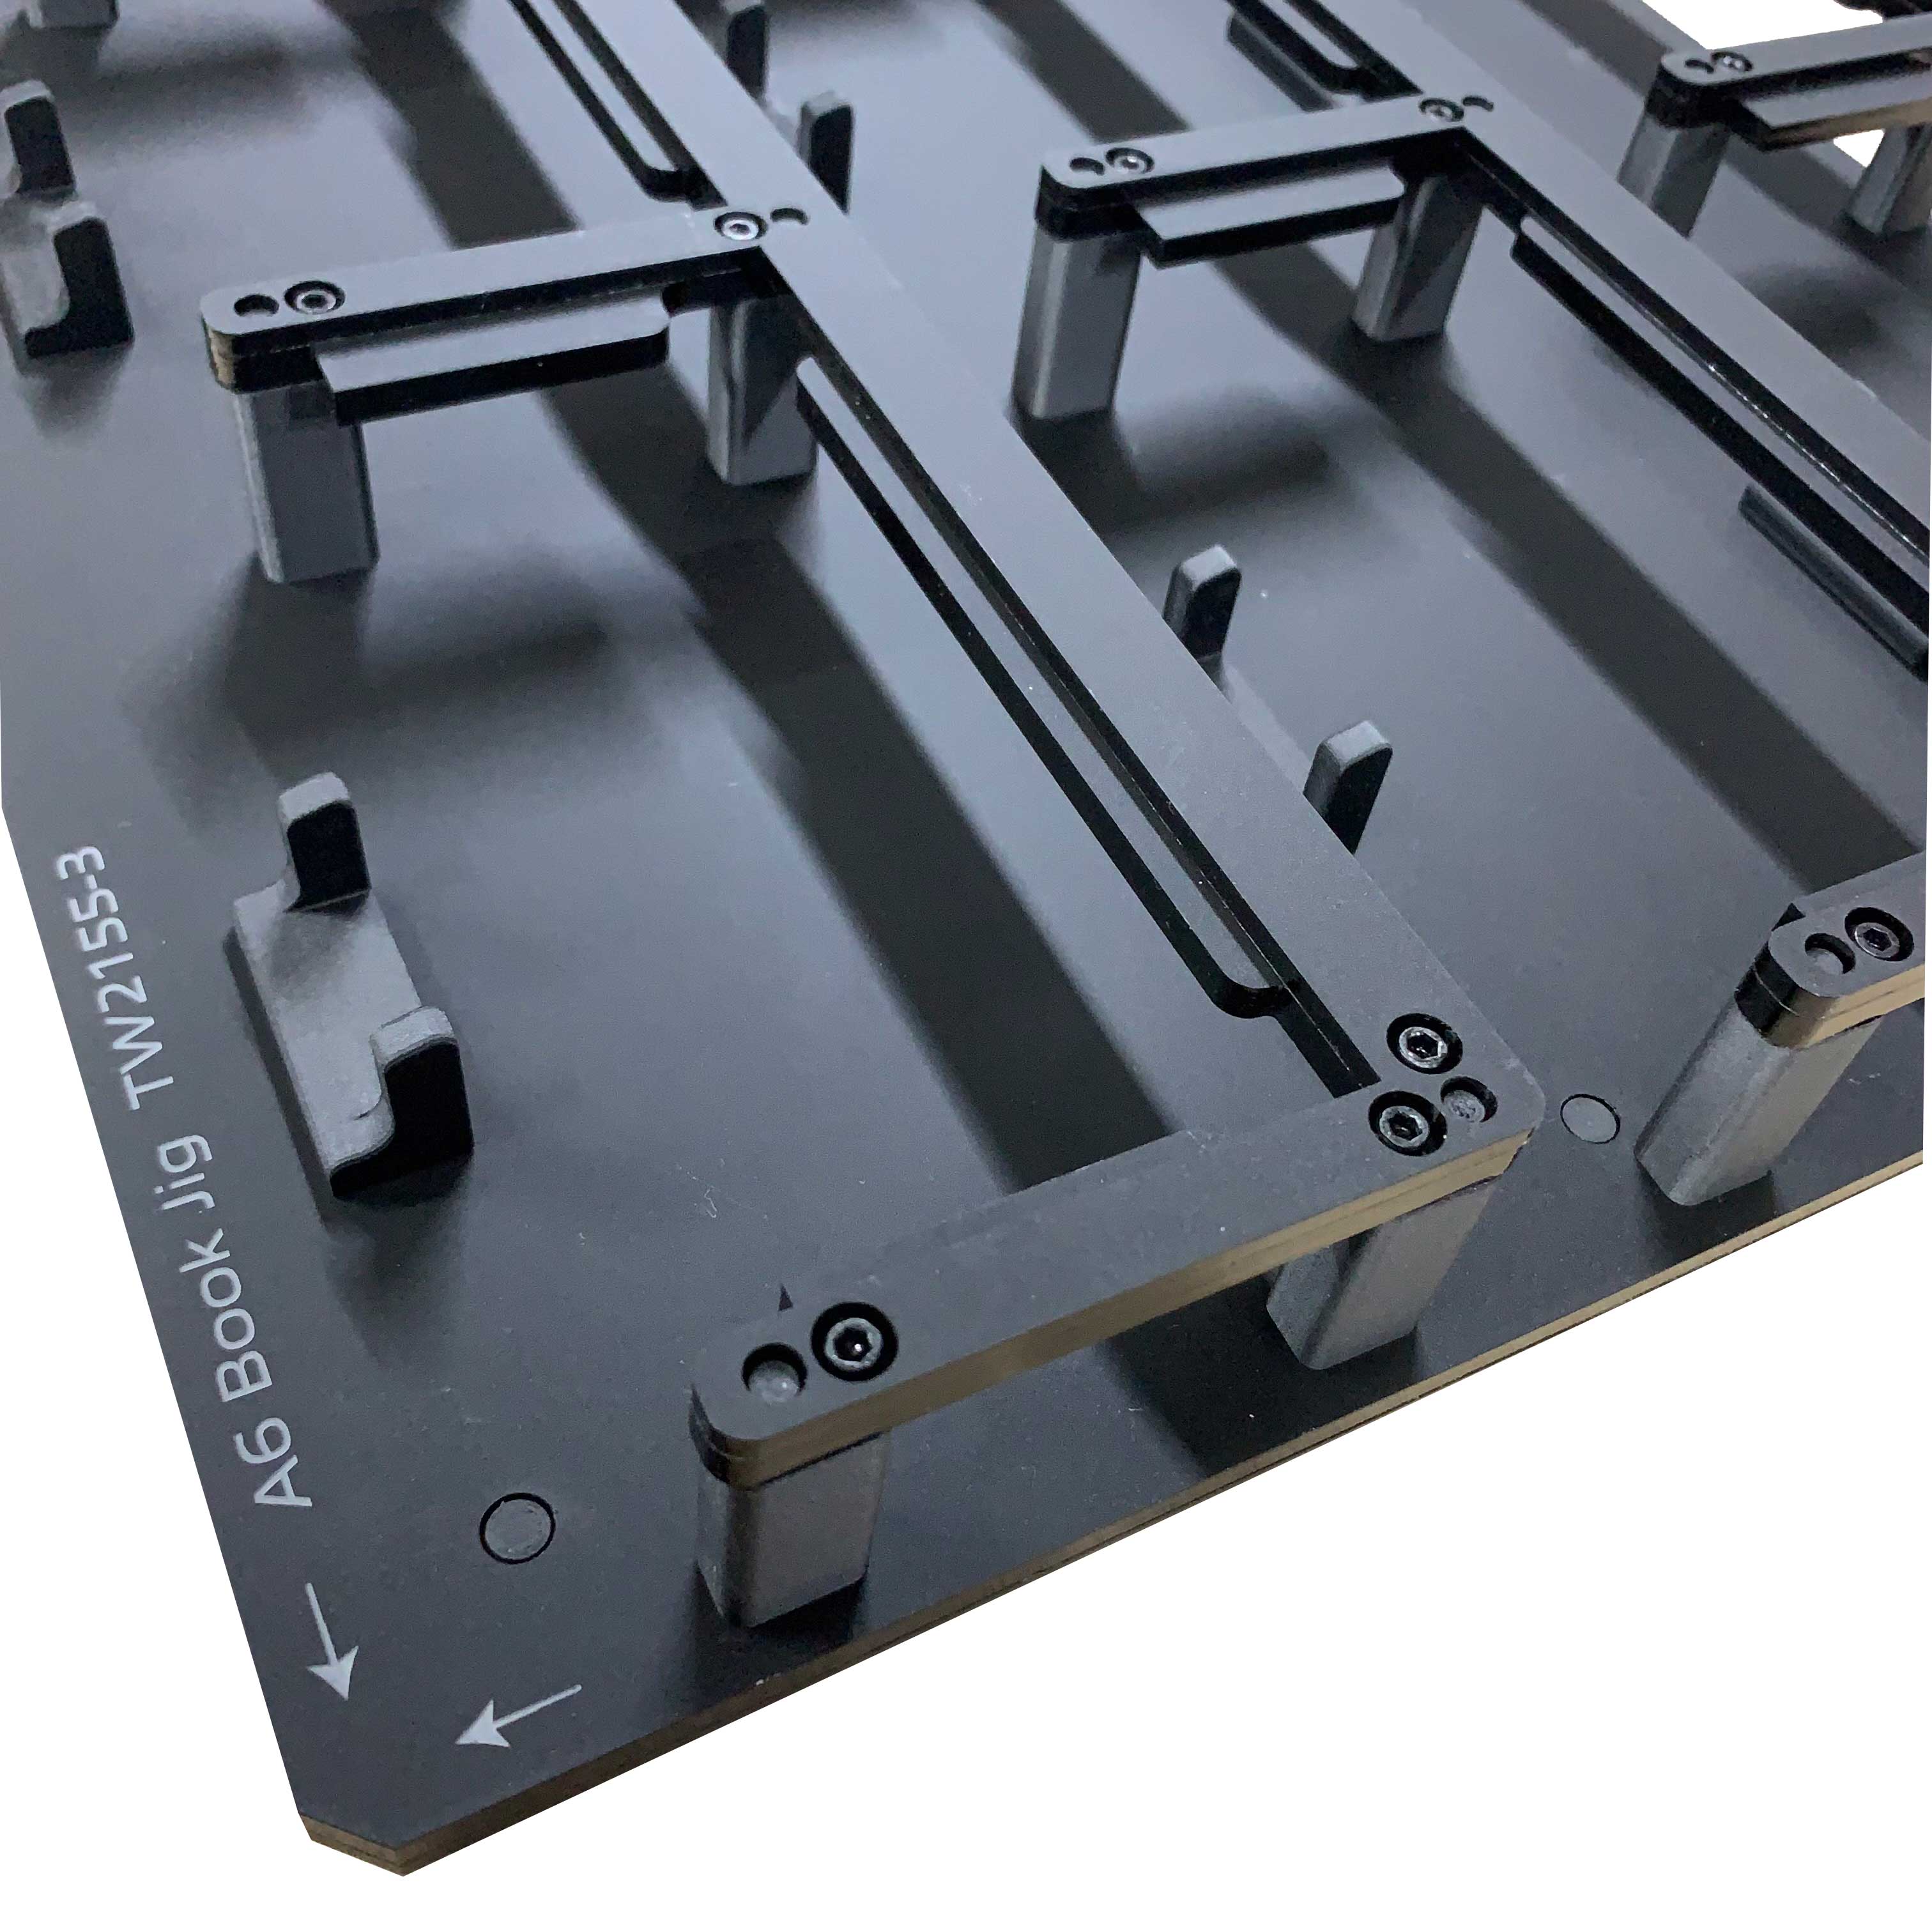 A6 Notebook Printing Jig for Mimaki UJF-7151 Flatbed Printer (18 Spaces)